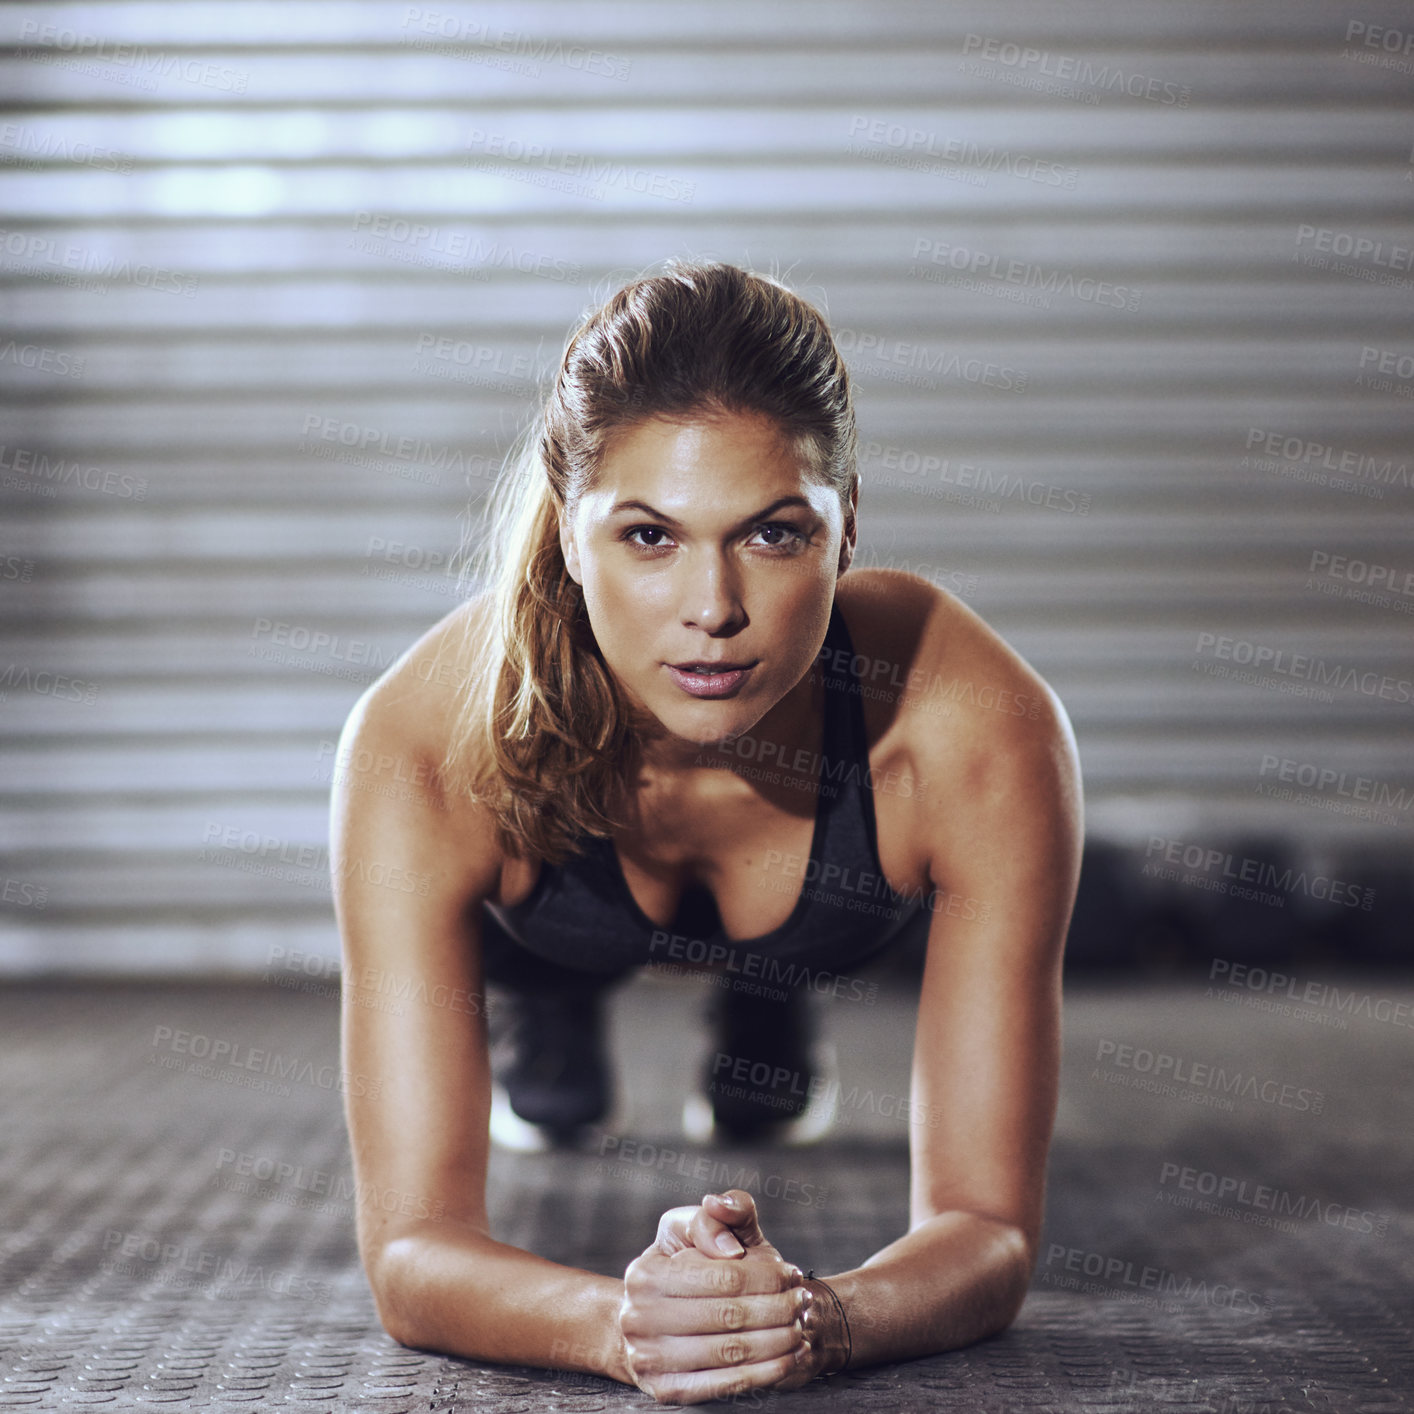 Buy stock photo Shot of a young woman doing a plank exercise at the gym